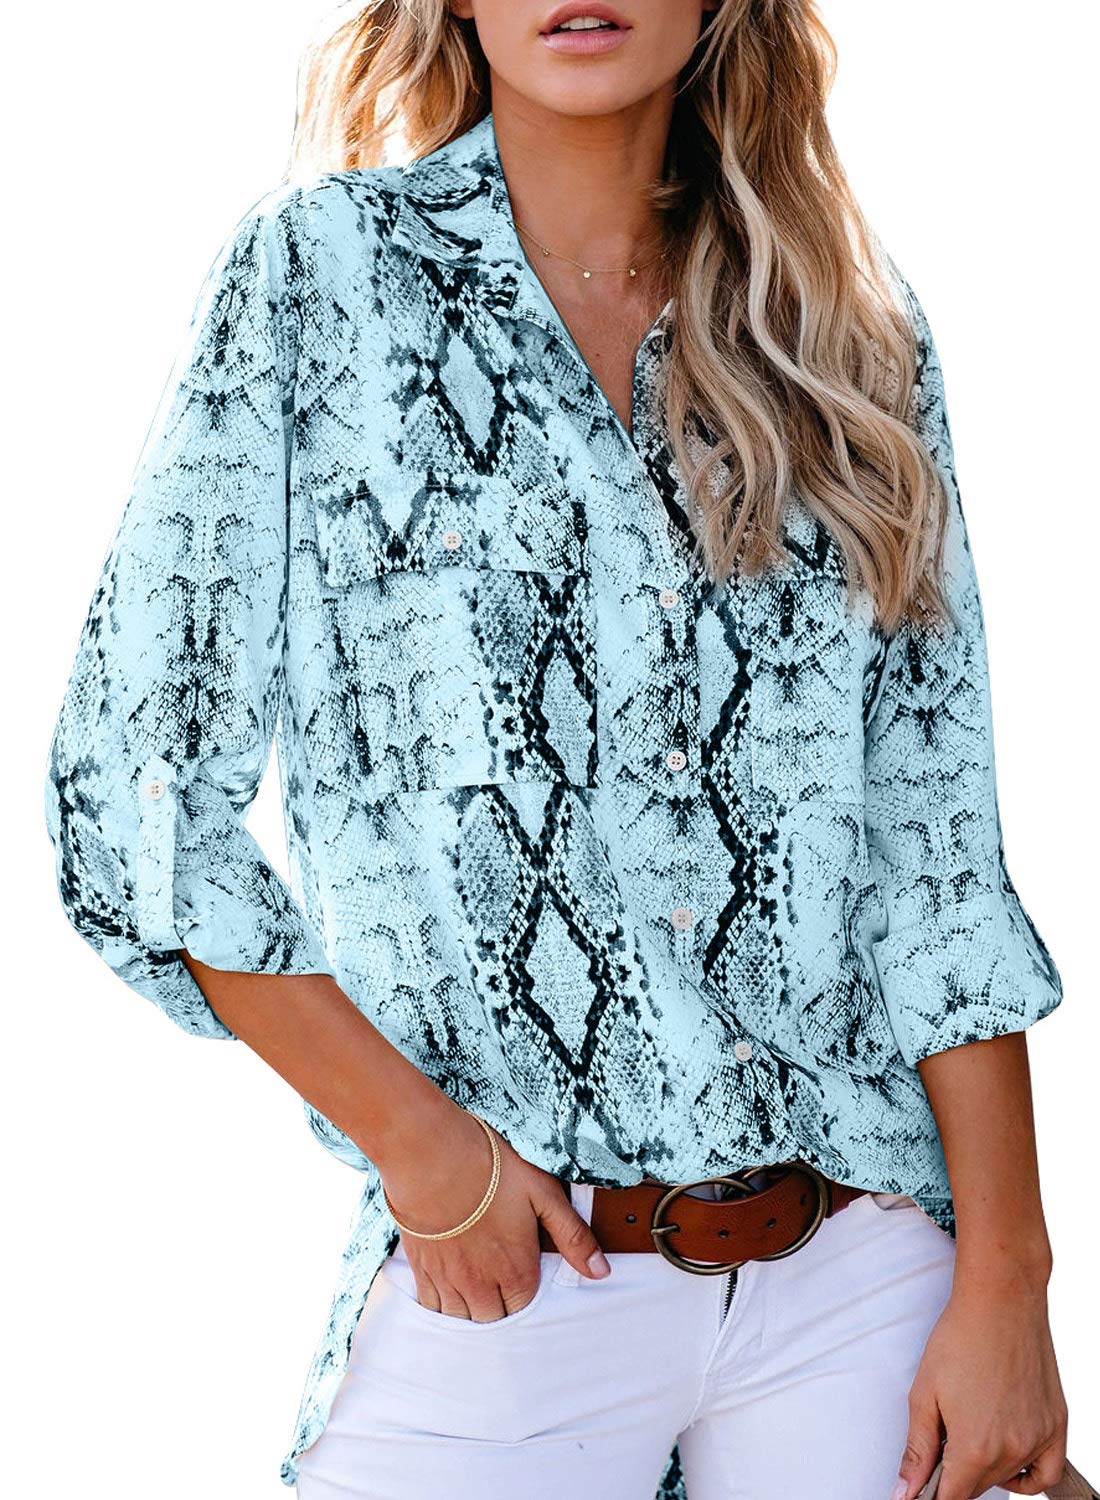 Astylish Women Loose Fit 3 4 Sleeve Button Down Collared Snake Print Tunic Blouse Tops Shirts Blue Medium